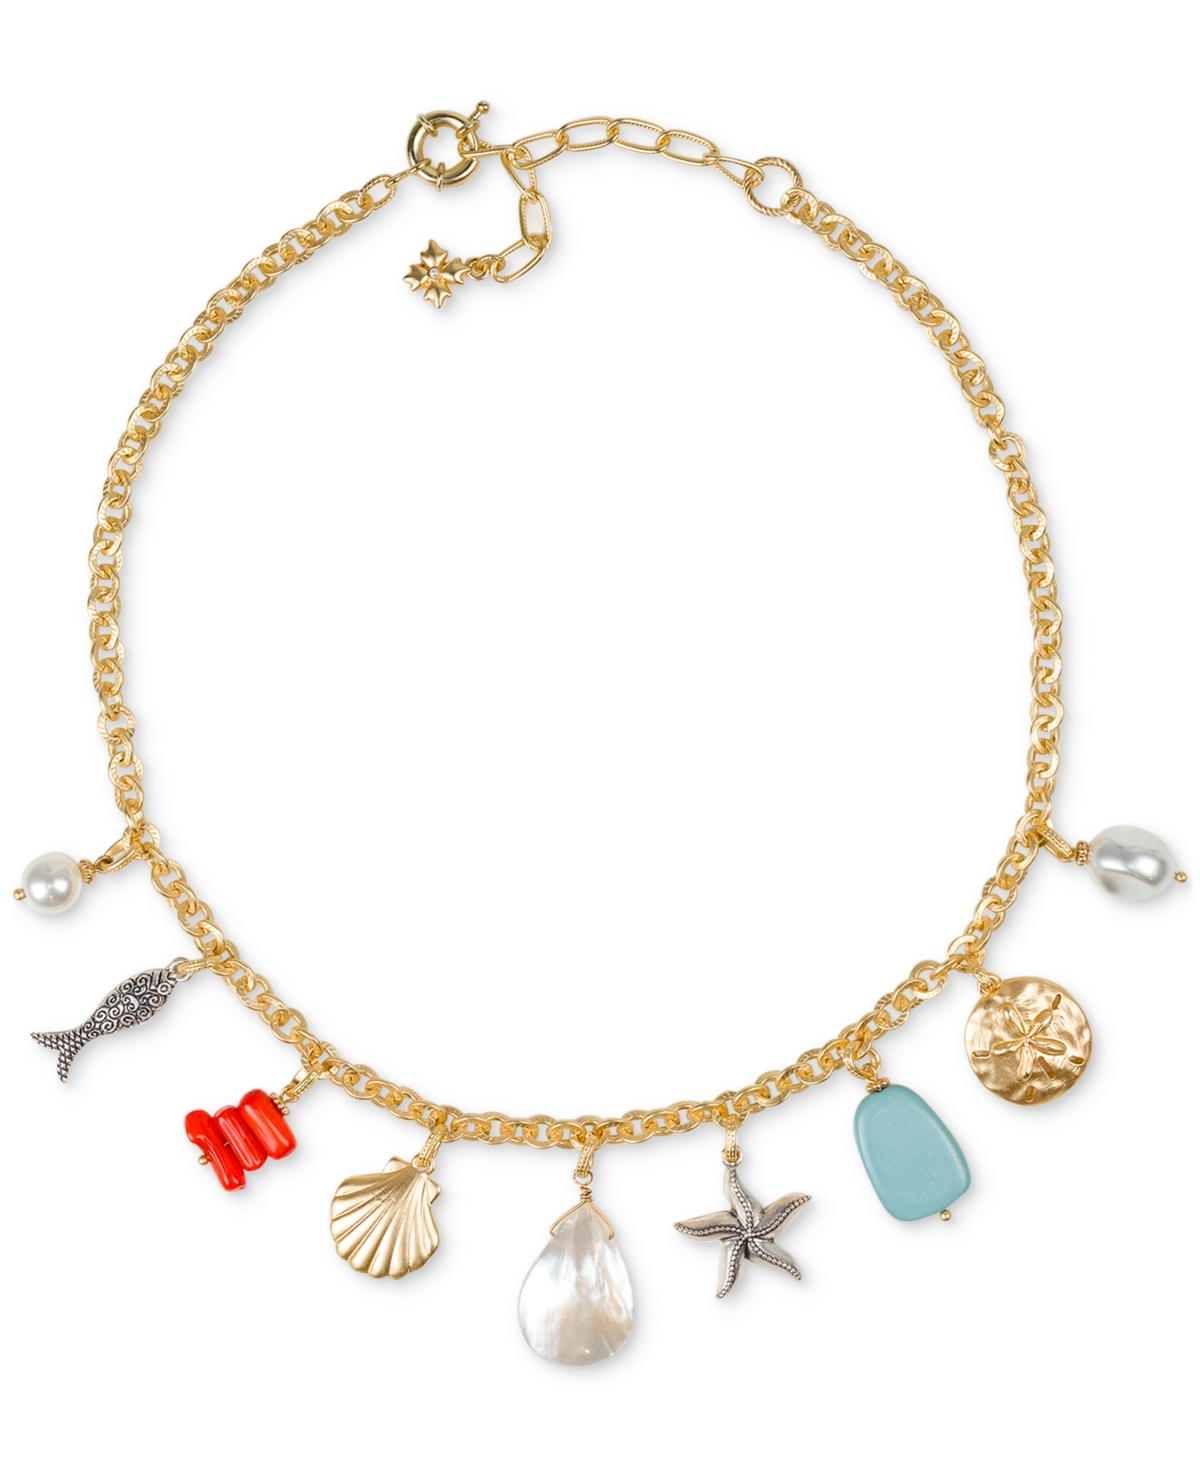 Patricia Nash Gold-tone Mixed Stone Seashore Charm Statement Necklace, 16" + 3" Extender In Egyp Gold